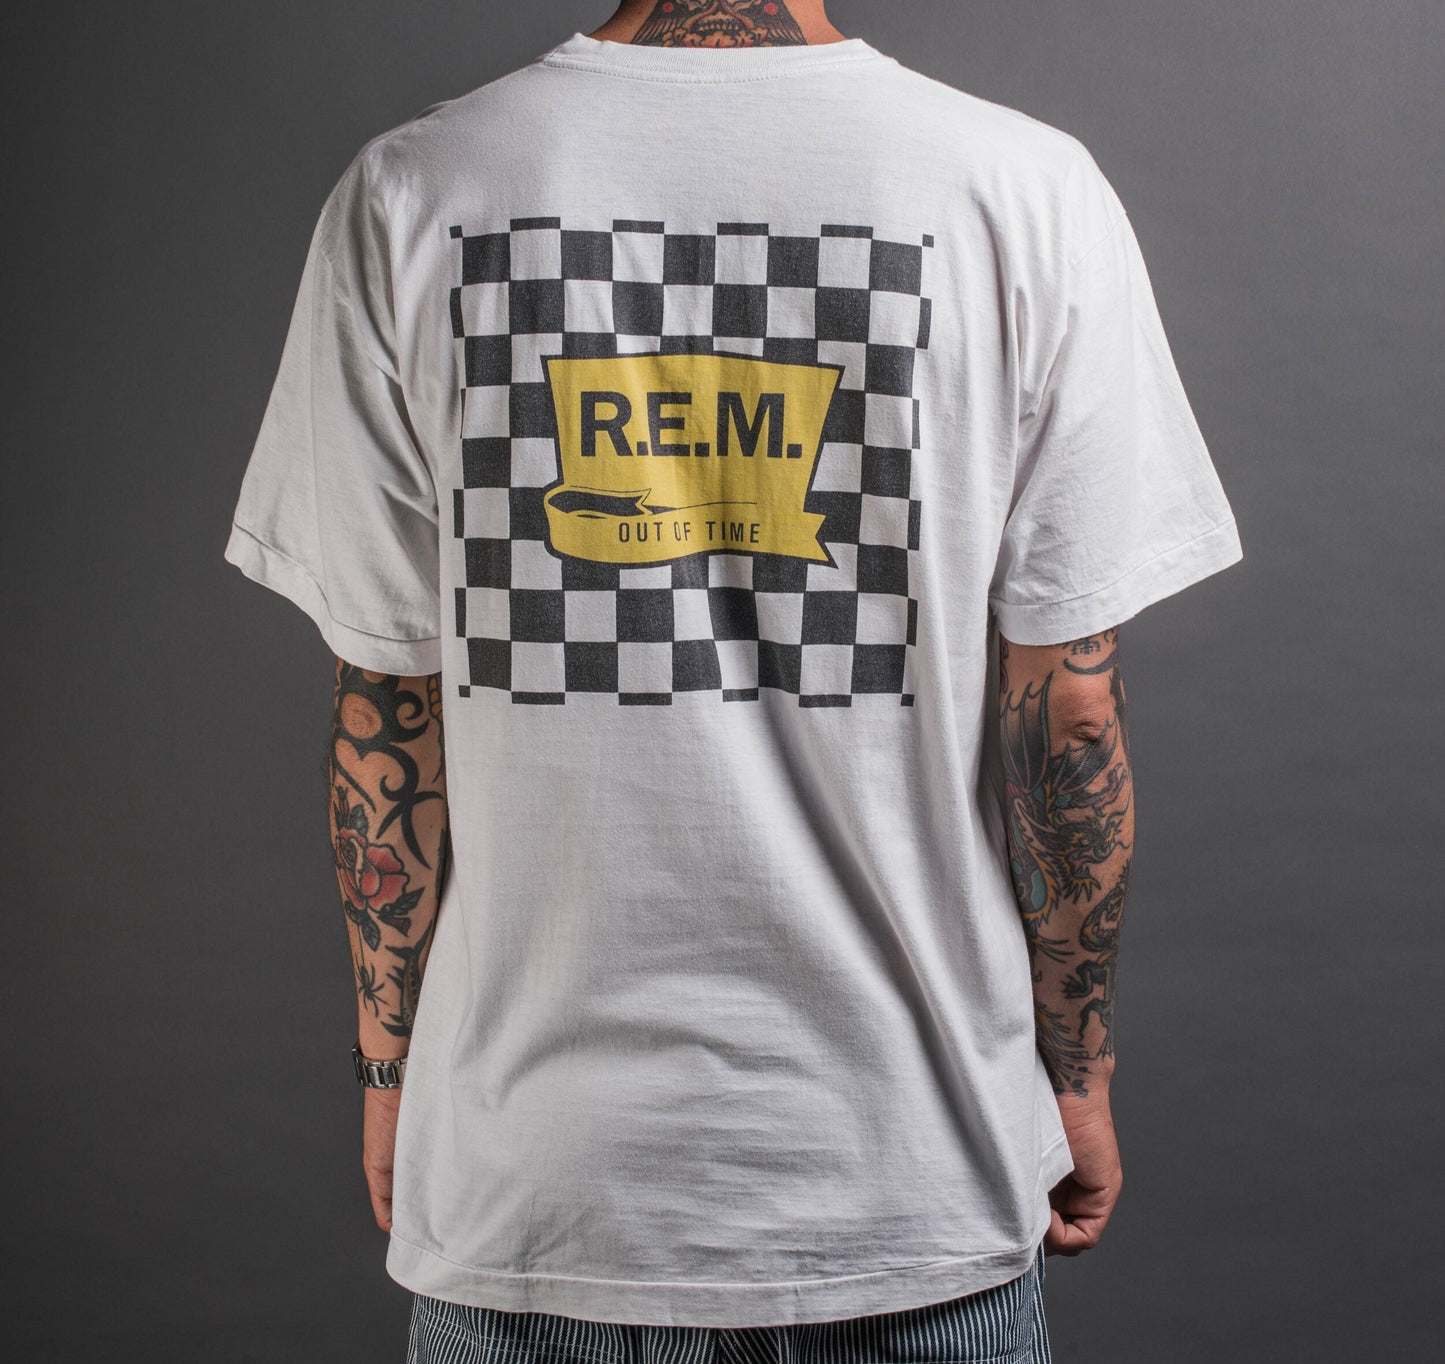 Vintage 90’s R.E.M Out Of Time T-Shirt